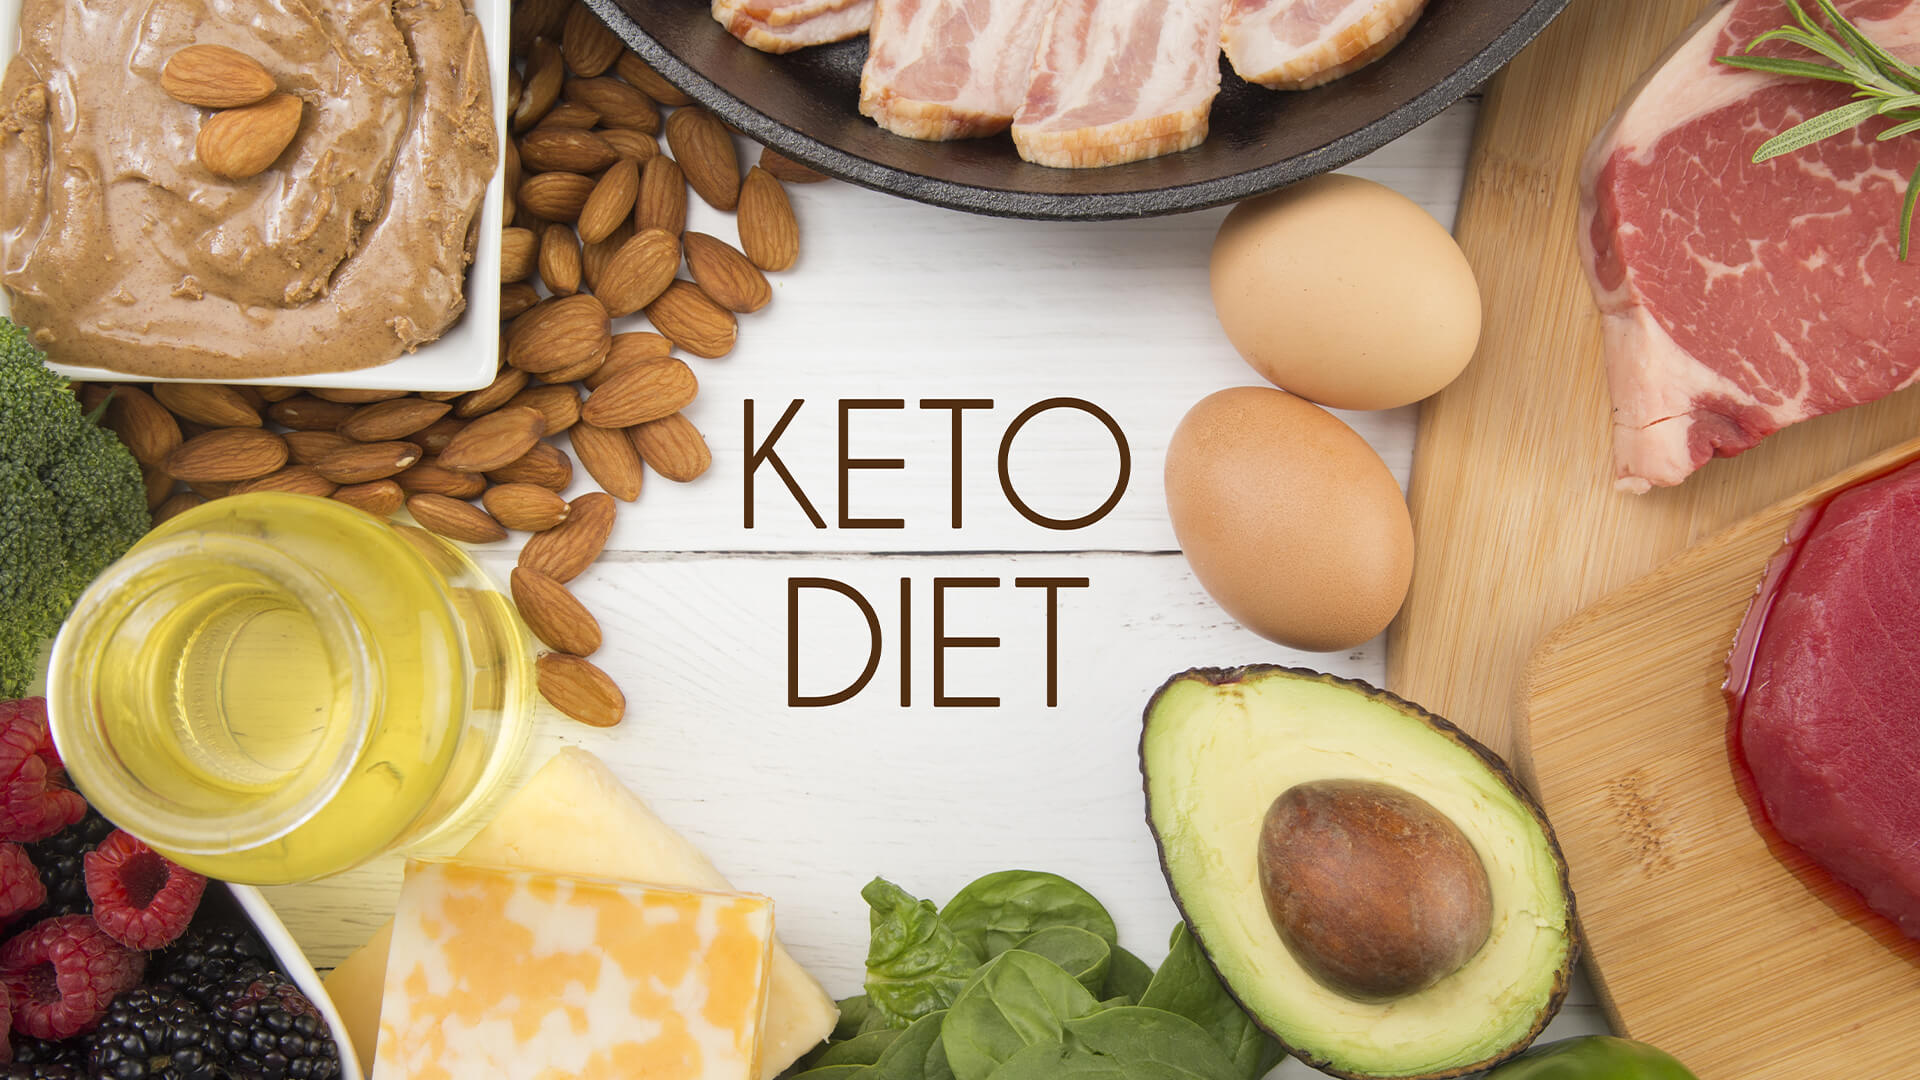 Five Things You May Not Know About the Keto Diet by Dr Michael Mosley